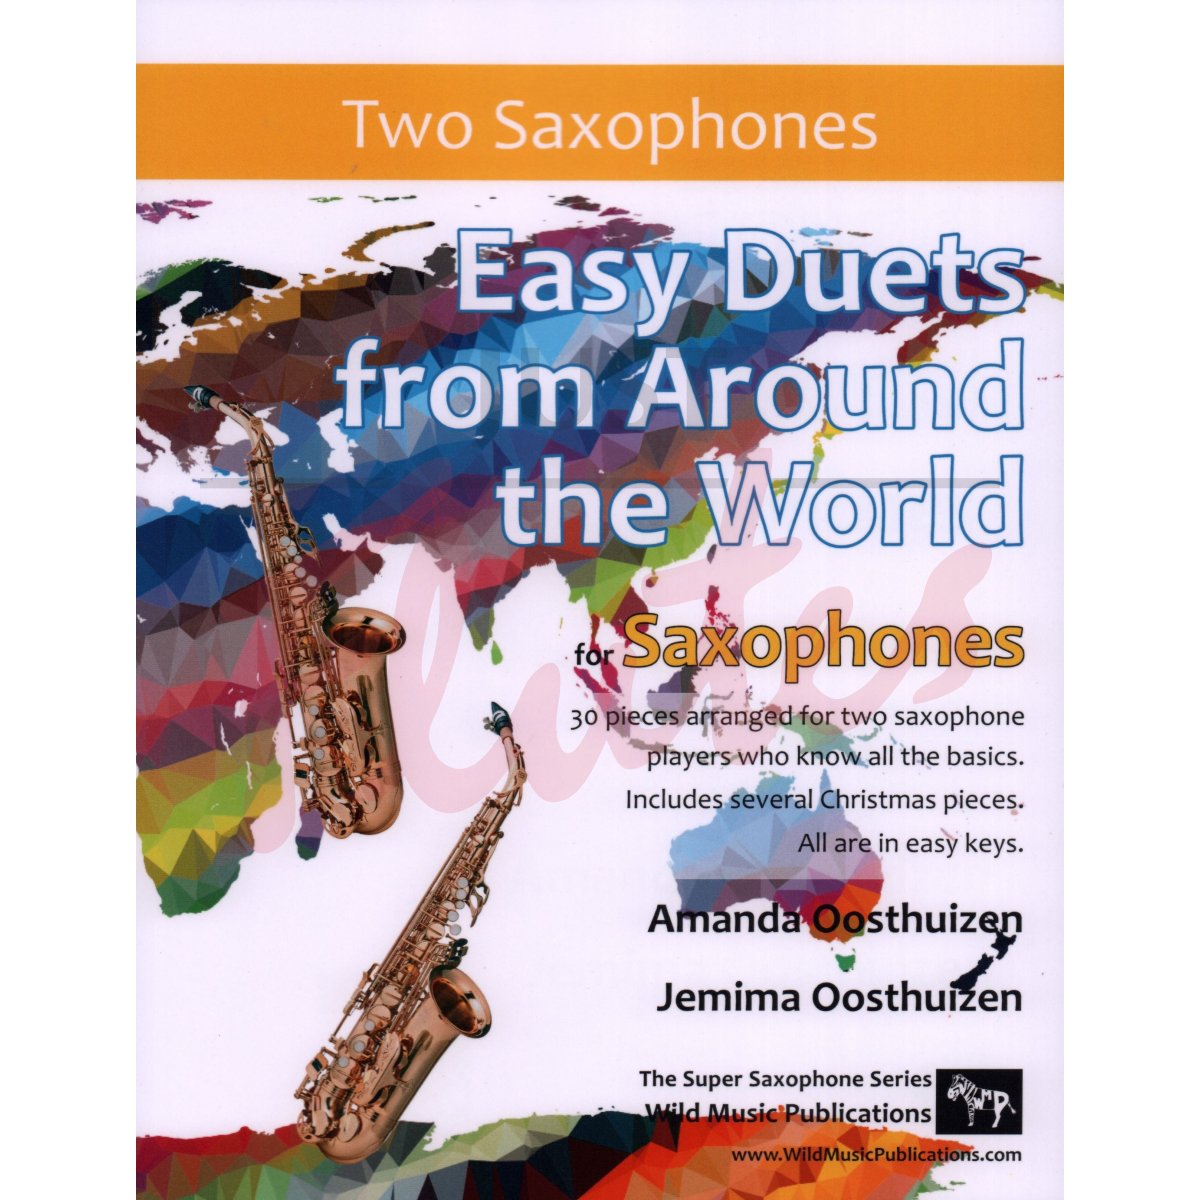 Easy Duets from Around the World for Two Saxophones